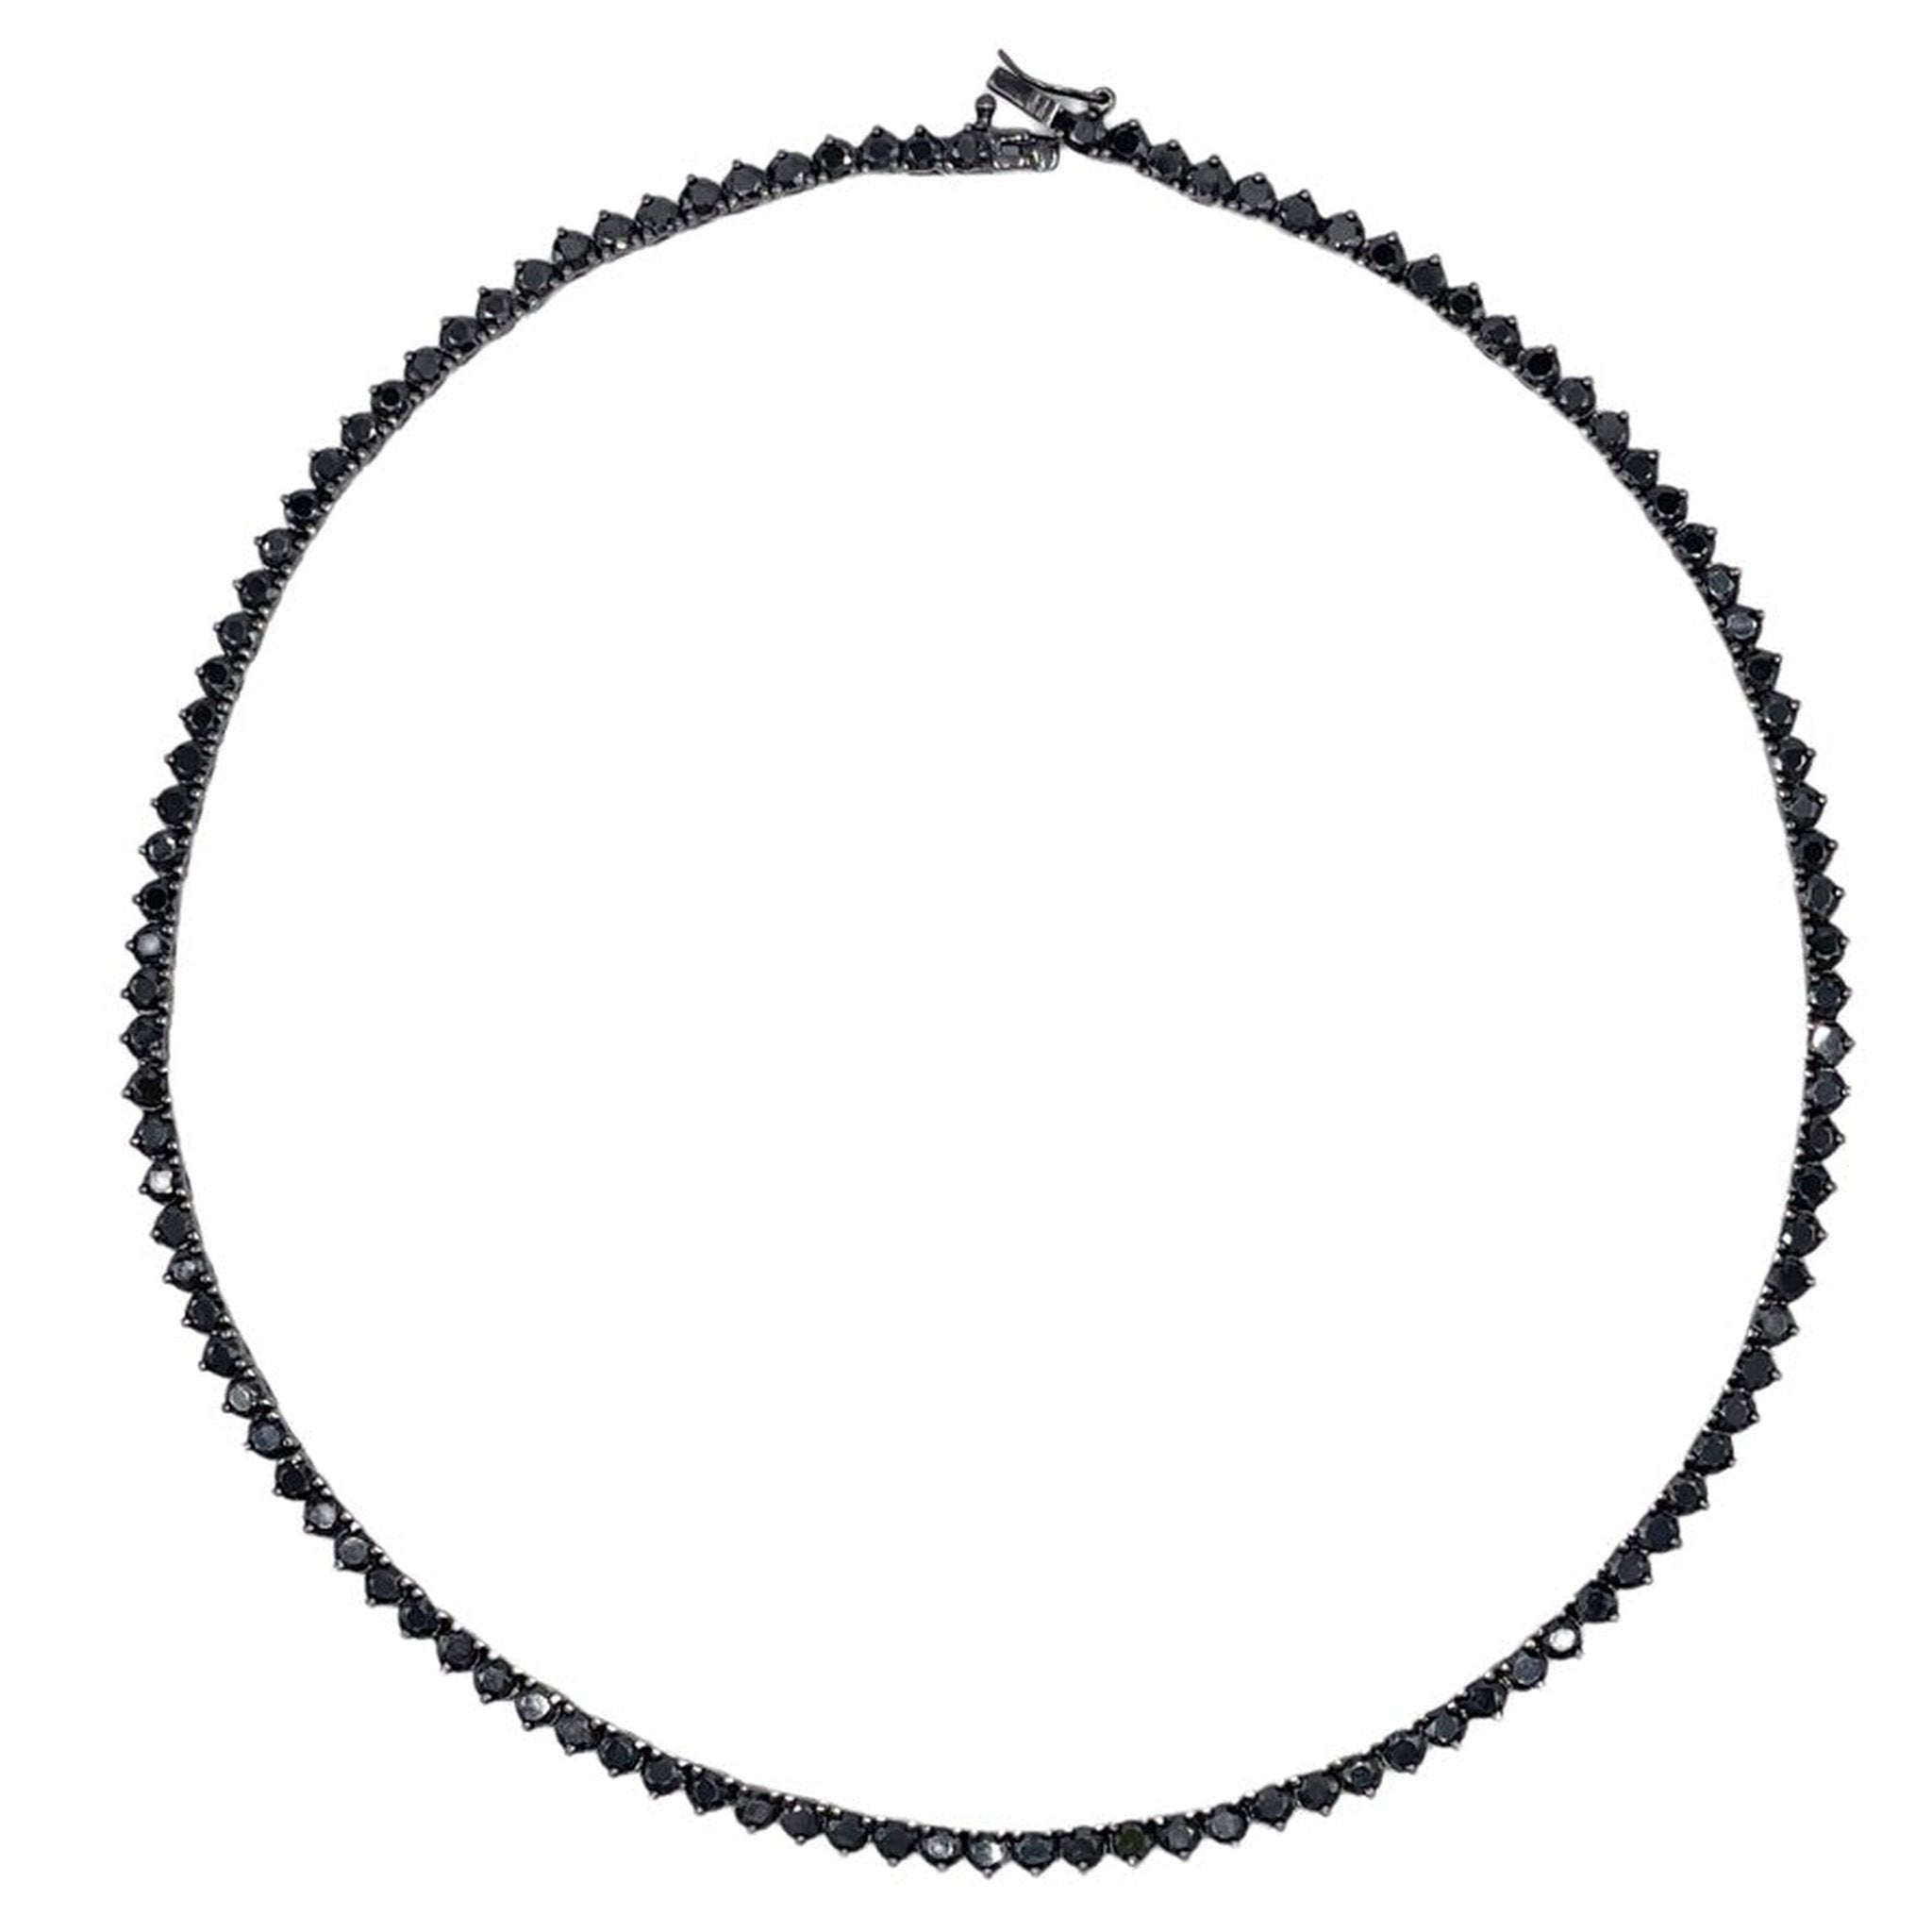 Amazon.com: Bling Bling NY Unisex 1 Row Tennis Necklace Black Finish Lab  Created Diamonds 3MM 4MM 5MM 6MM Solitaires Choker Tennis Chain 16-30  inches Bracelet 6.5-9 inches (Black 3mm, Bracelet 6.5''): Clothing,